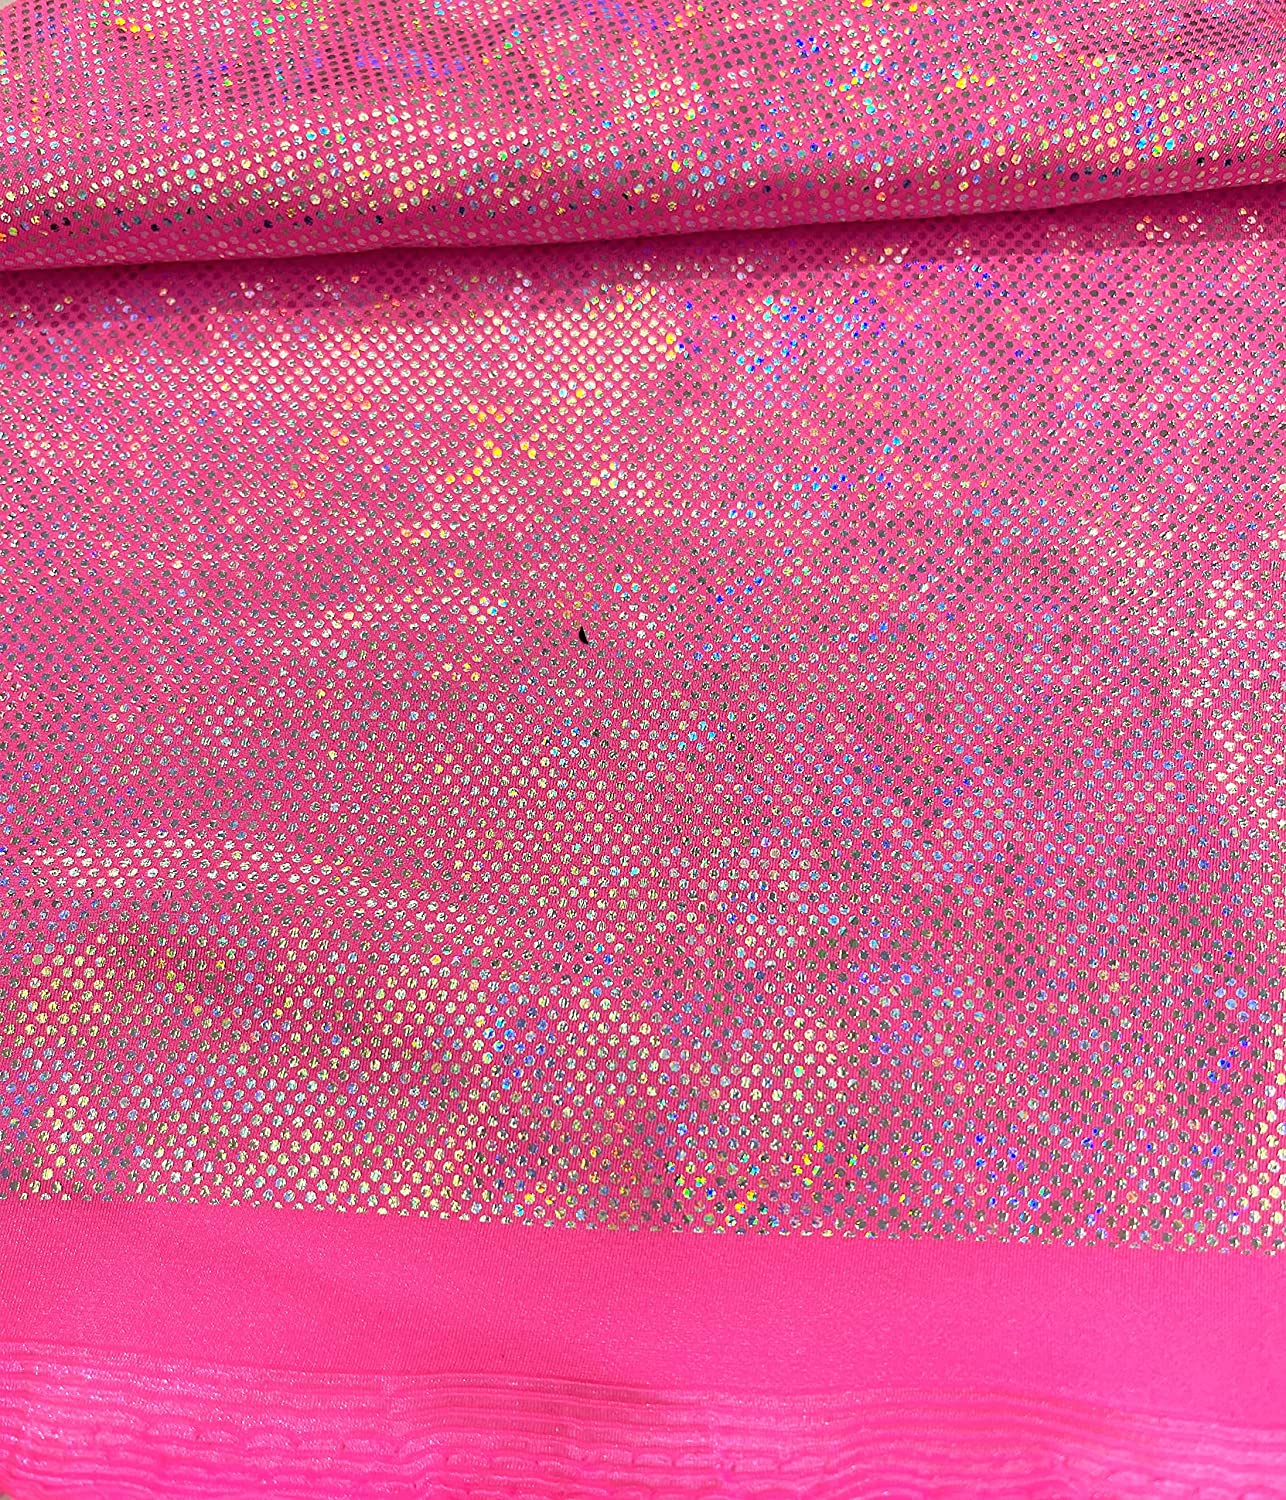 Shattered Glass Foil Iridescent Hologram Dancewear 4 Way Stretch Spandex Nylon Tricot Fabric (1 Yard, Candy Pink)